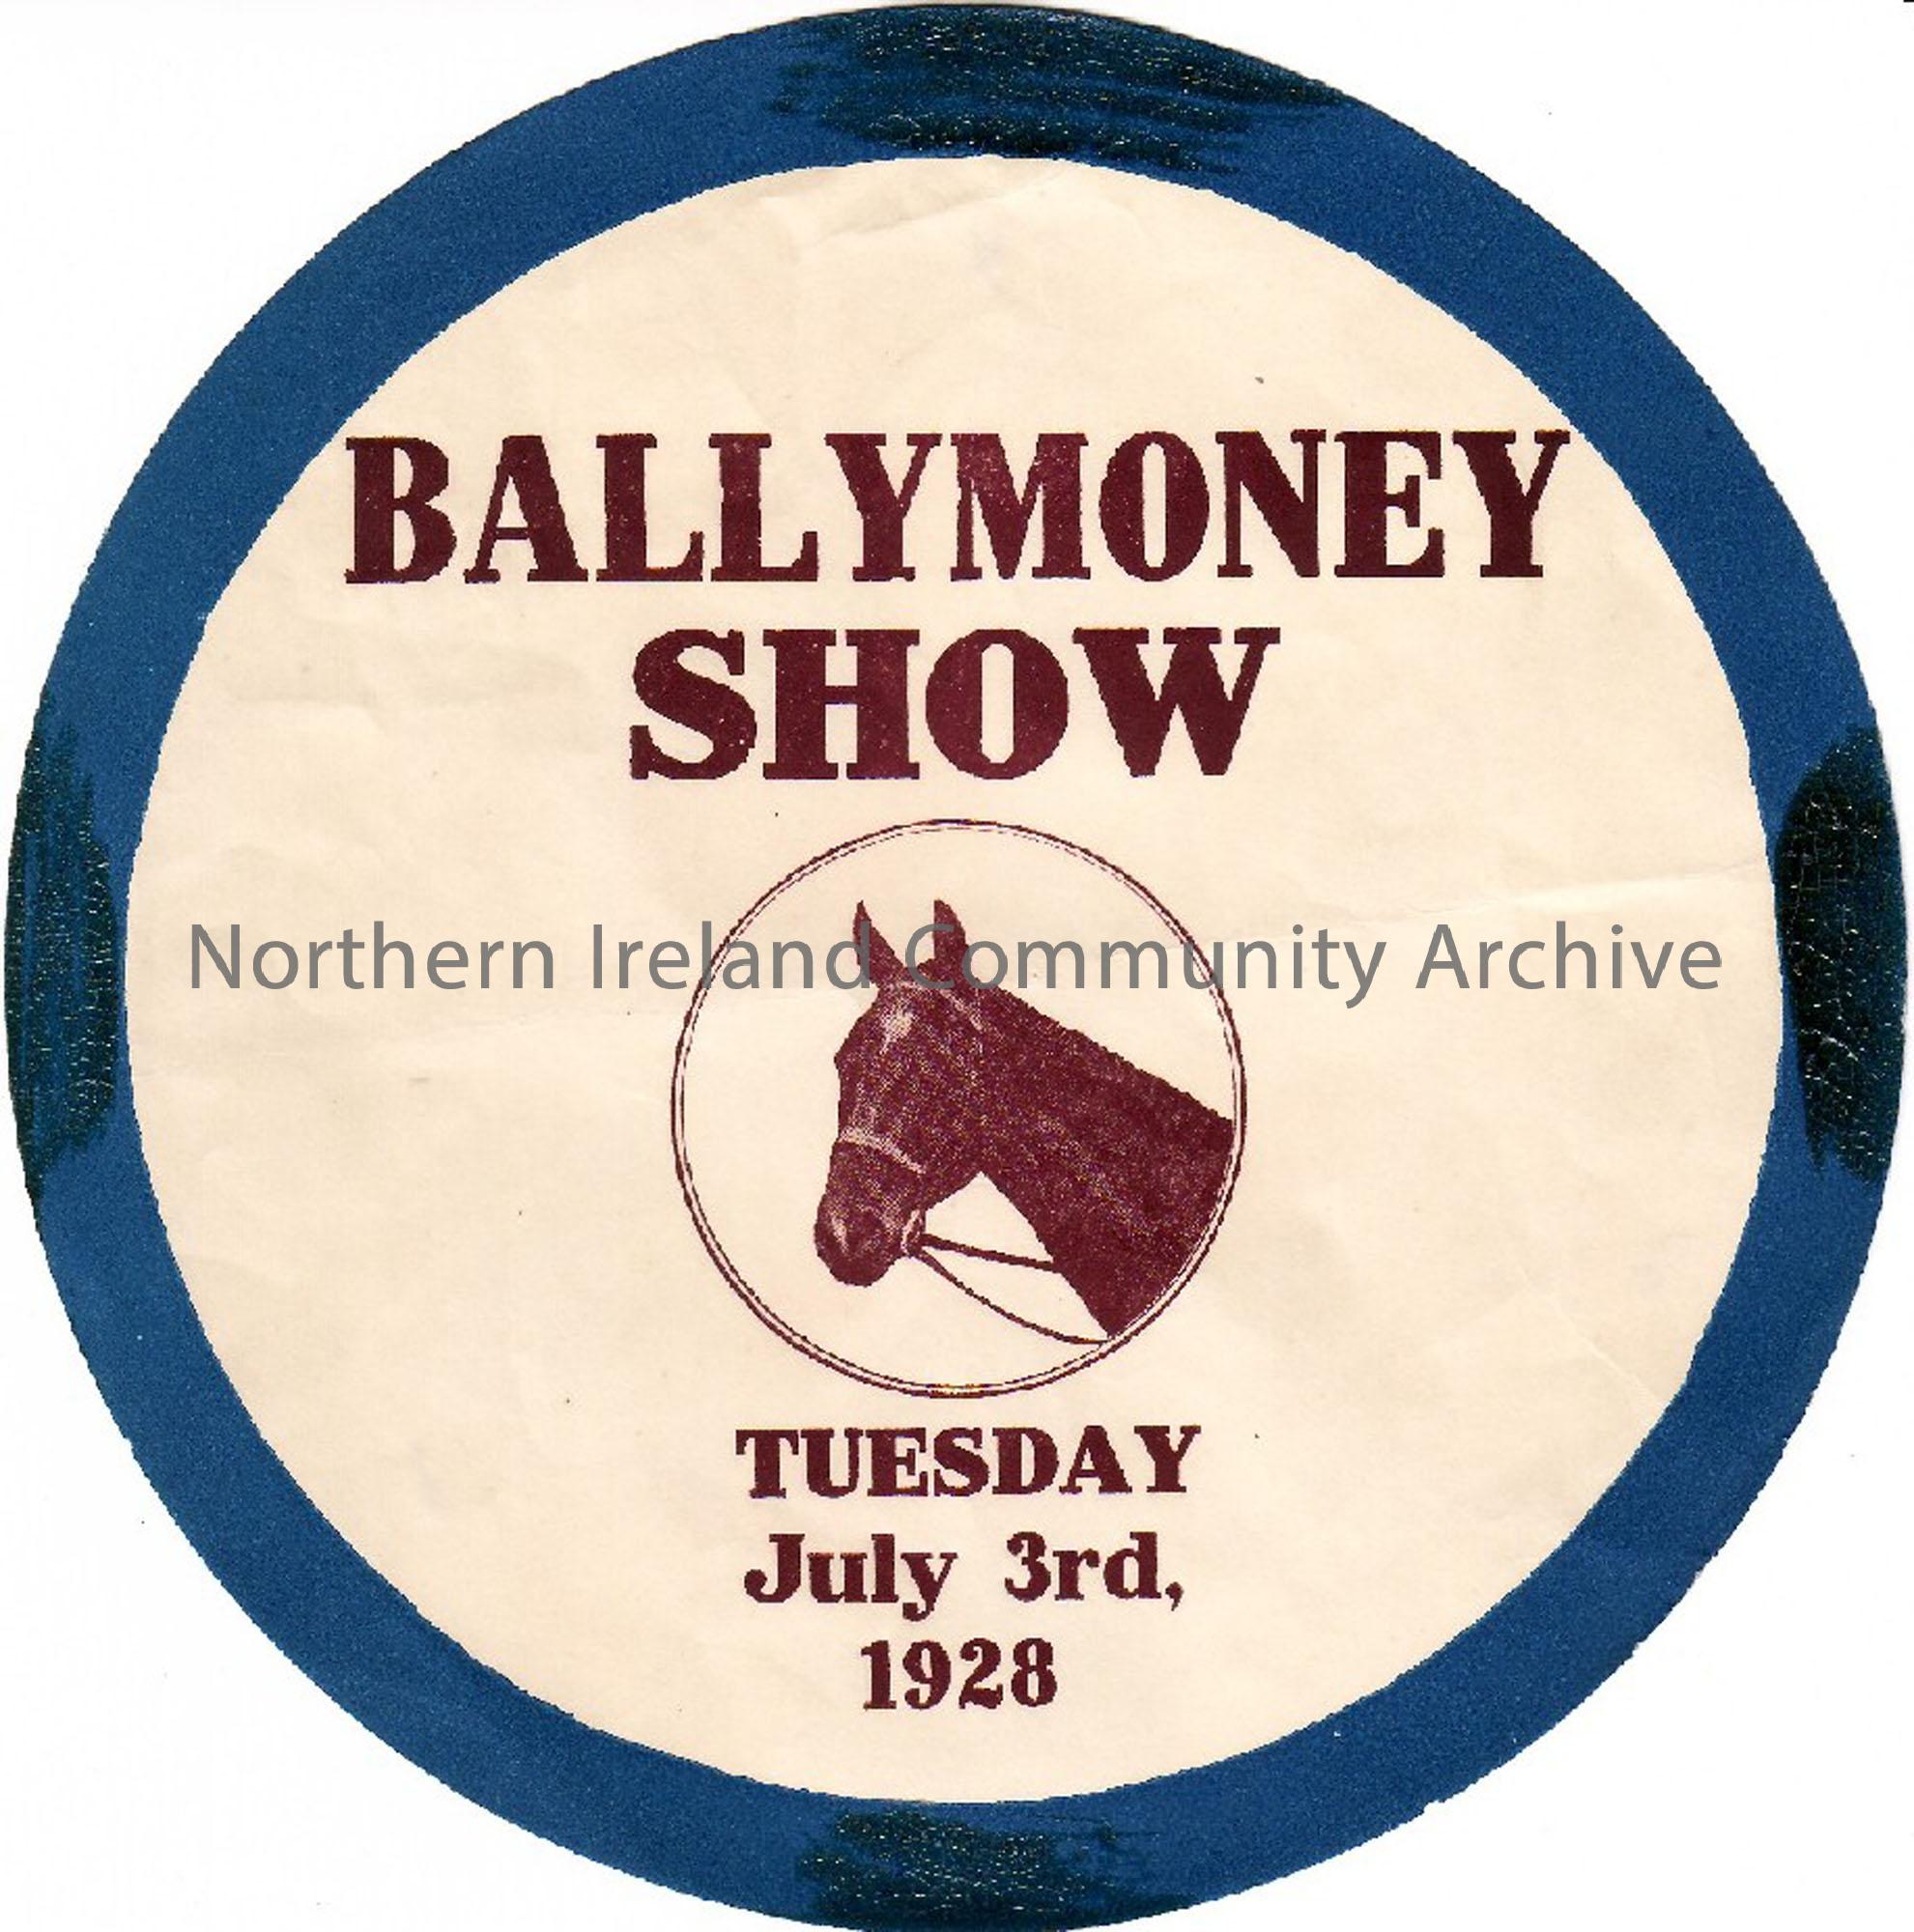 Ballymoney Show Poster, Tuesday 3rd July, 1928